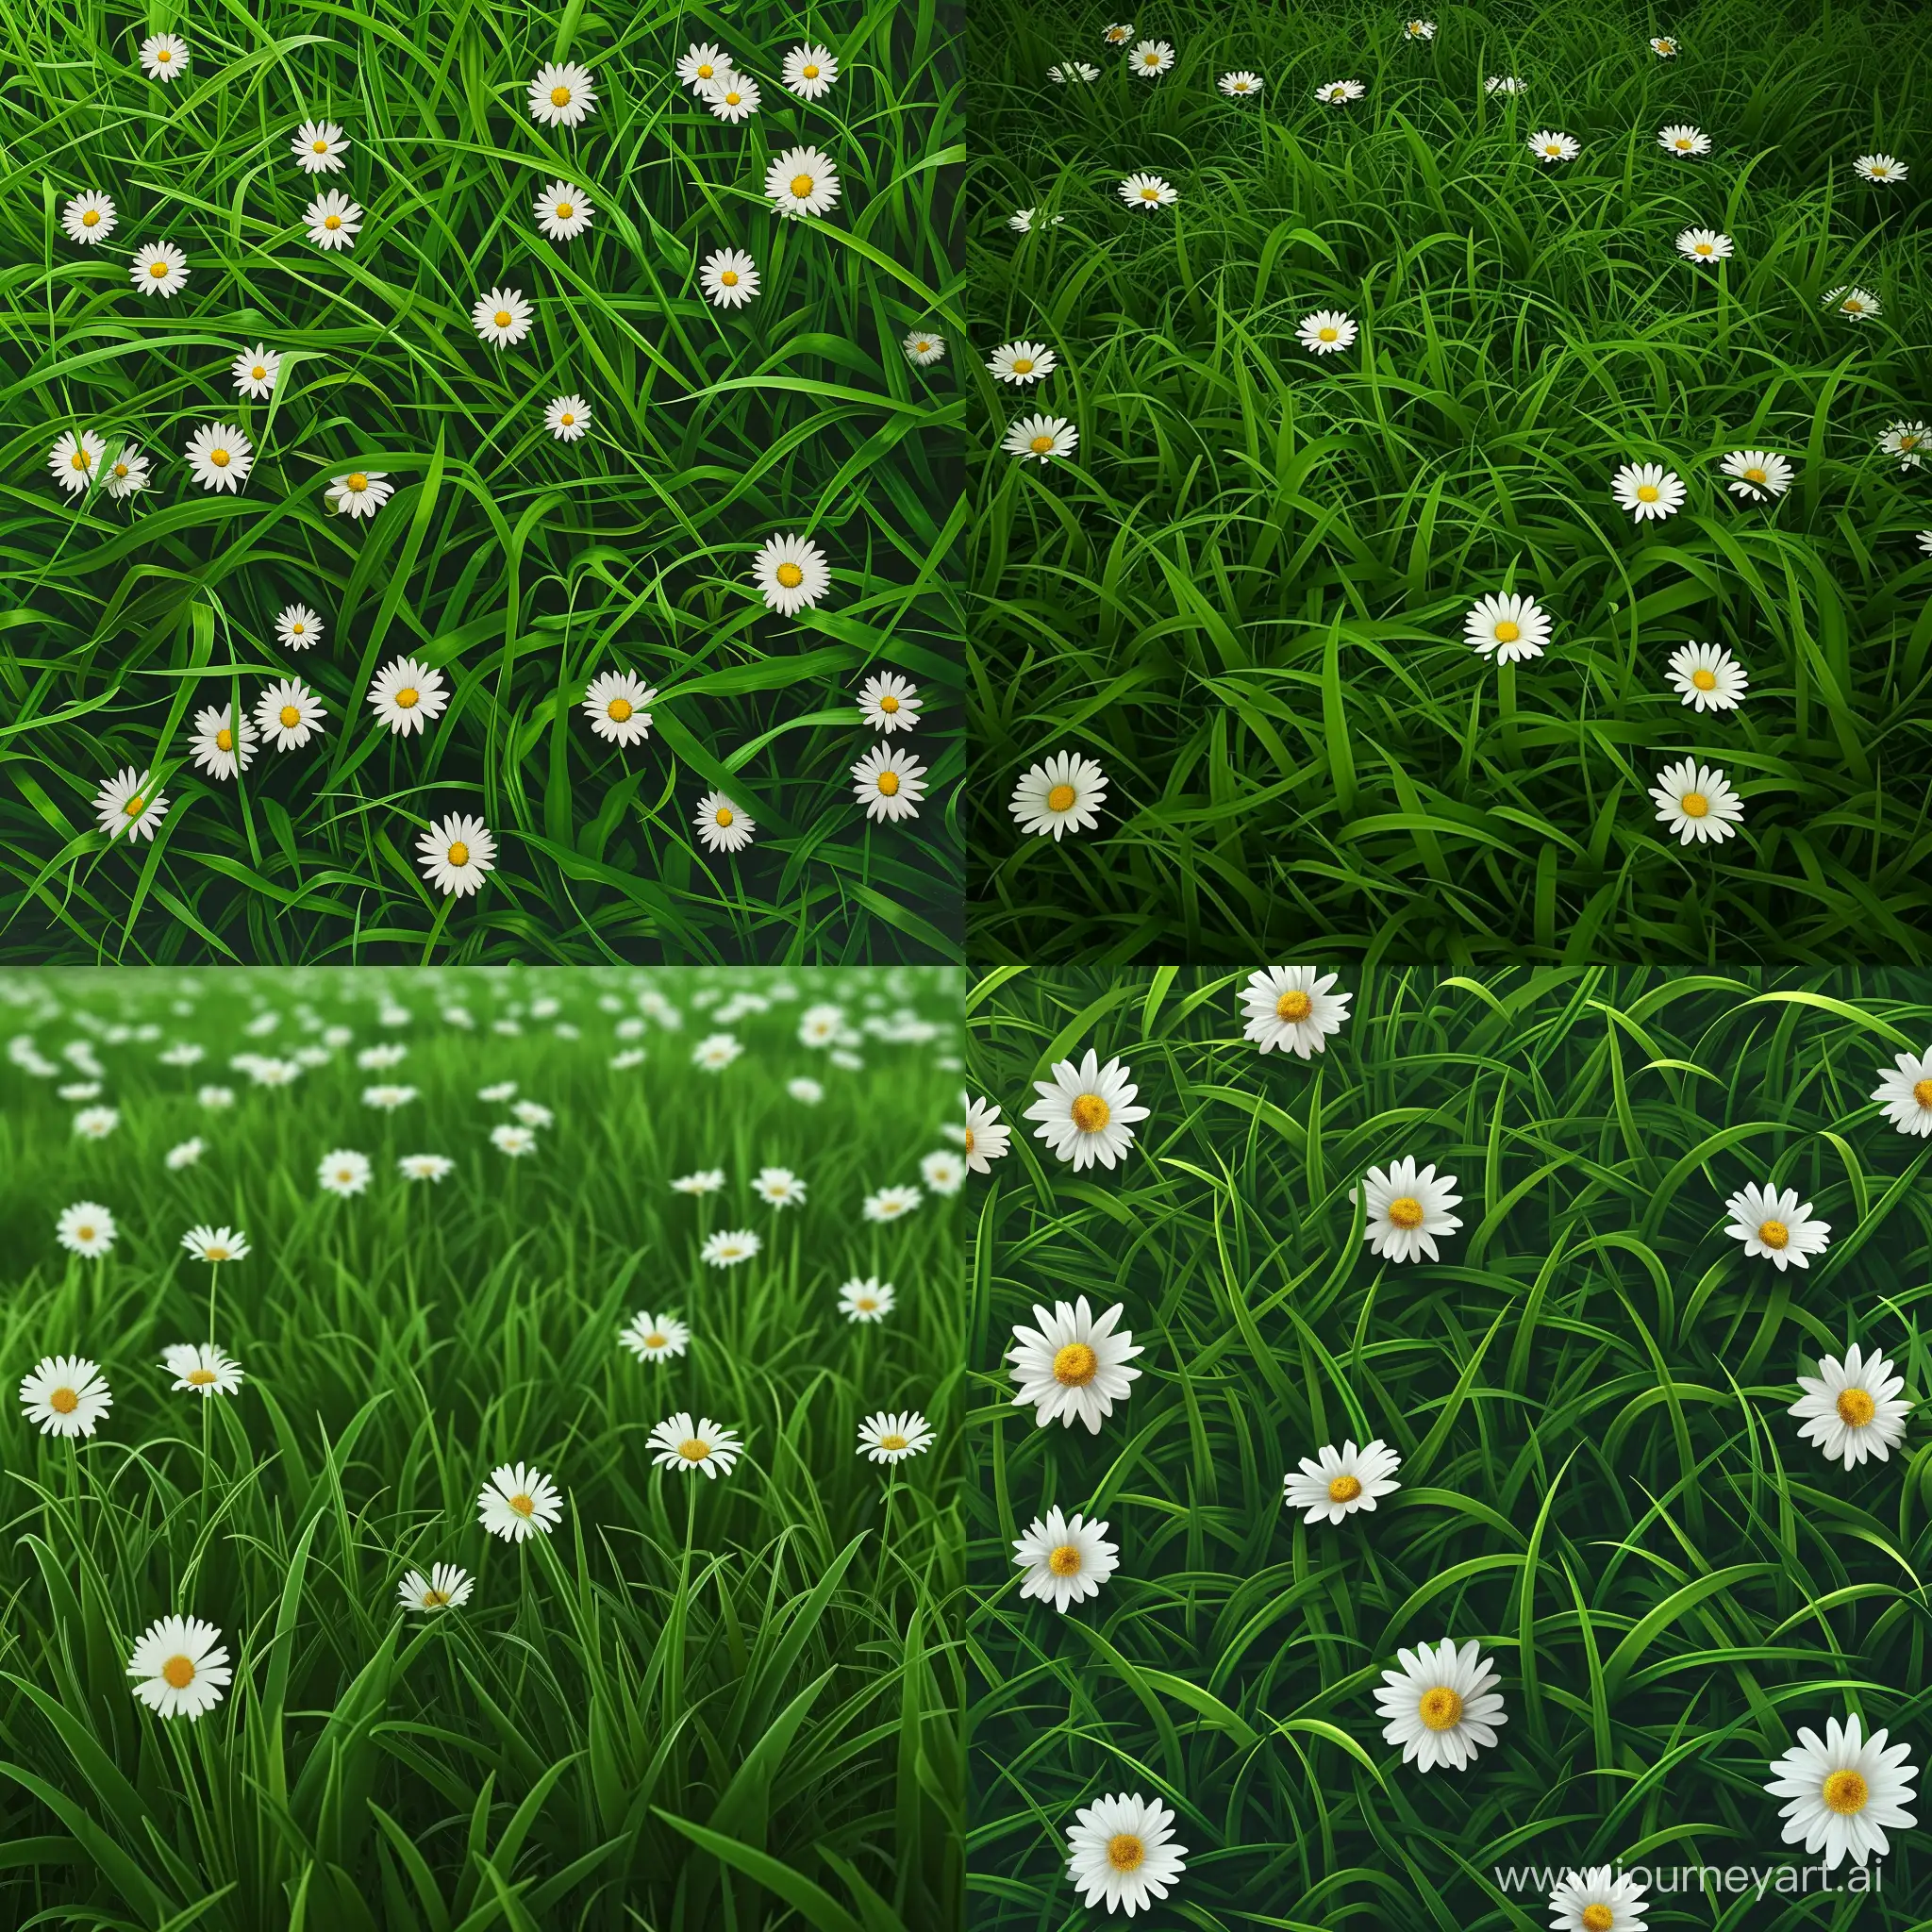 Scenic-Green-Grass-Field-with-White-Daisies